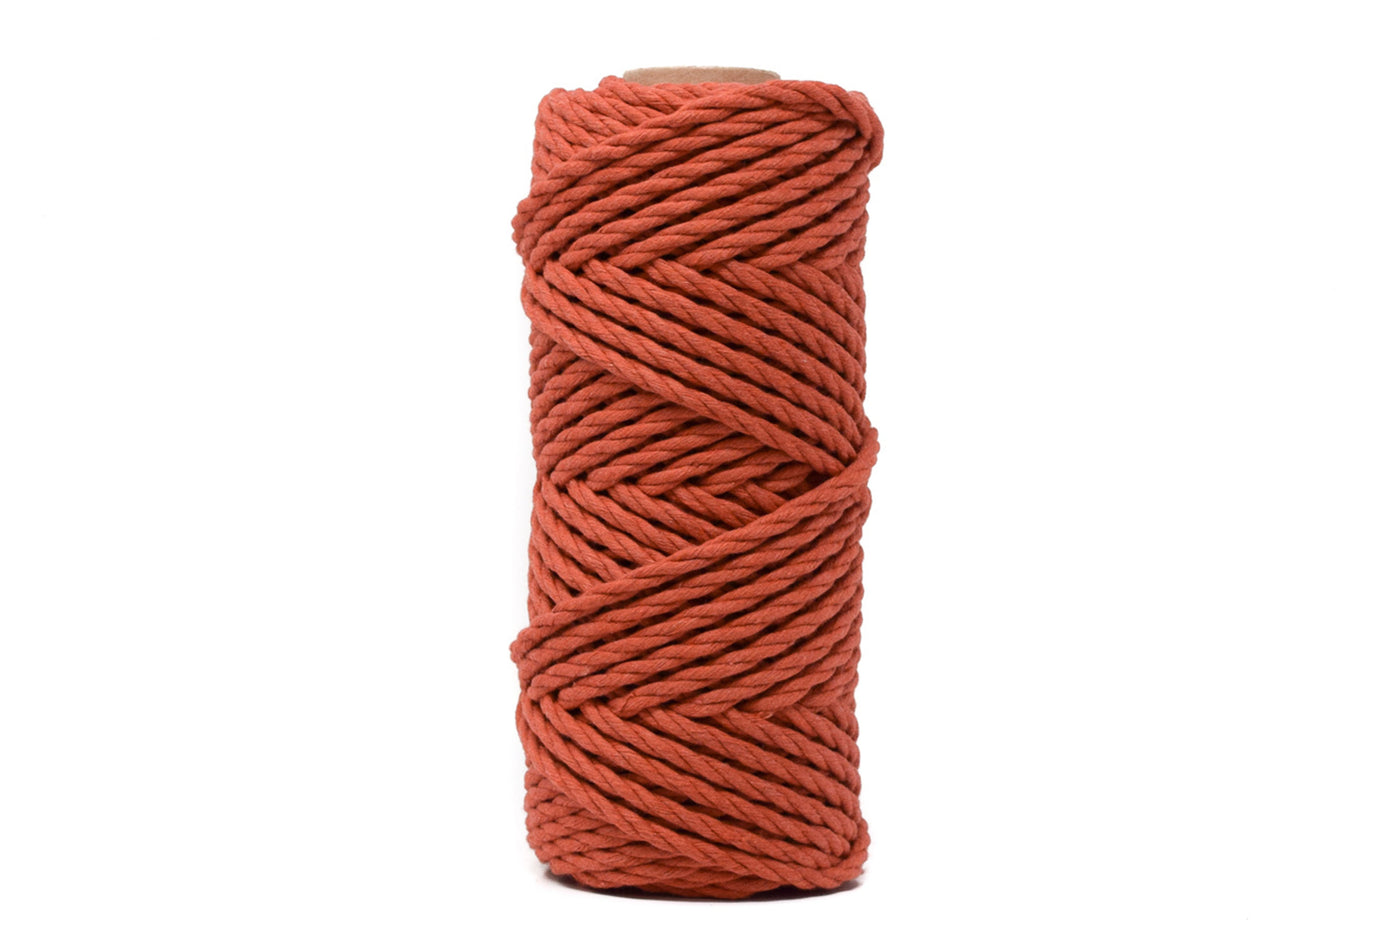 COTTON ROPE ZERO WASTE 5 MM - 3 PLY - TERRACOTTA COLOR